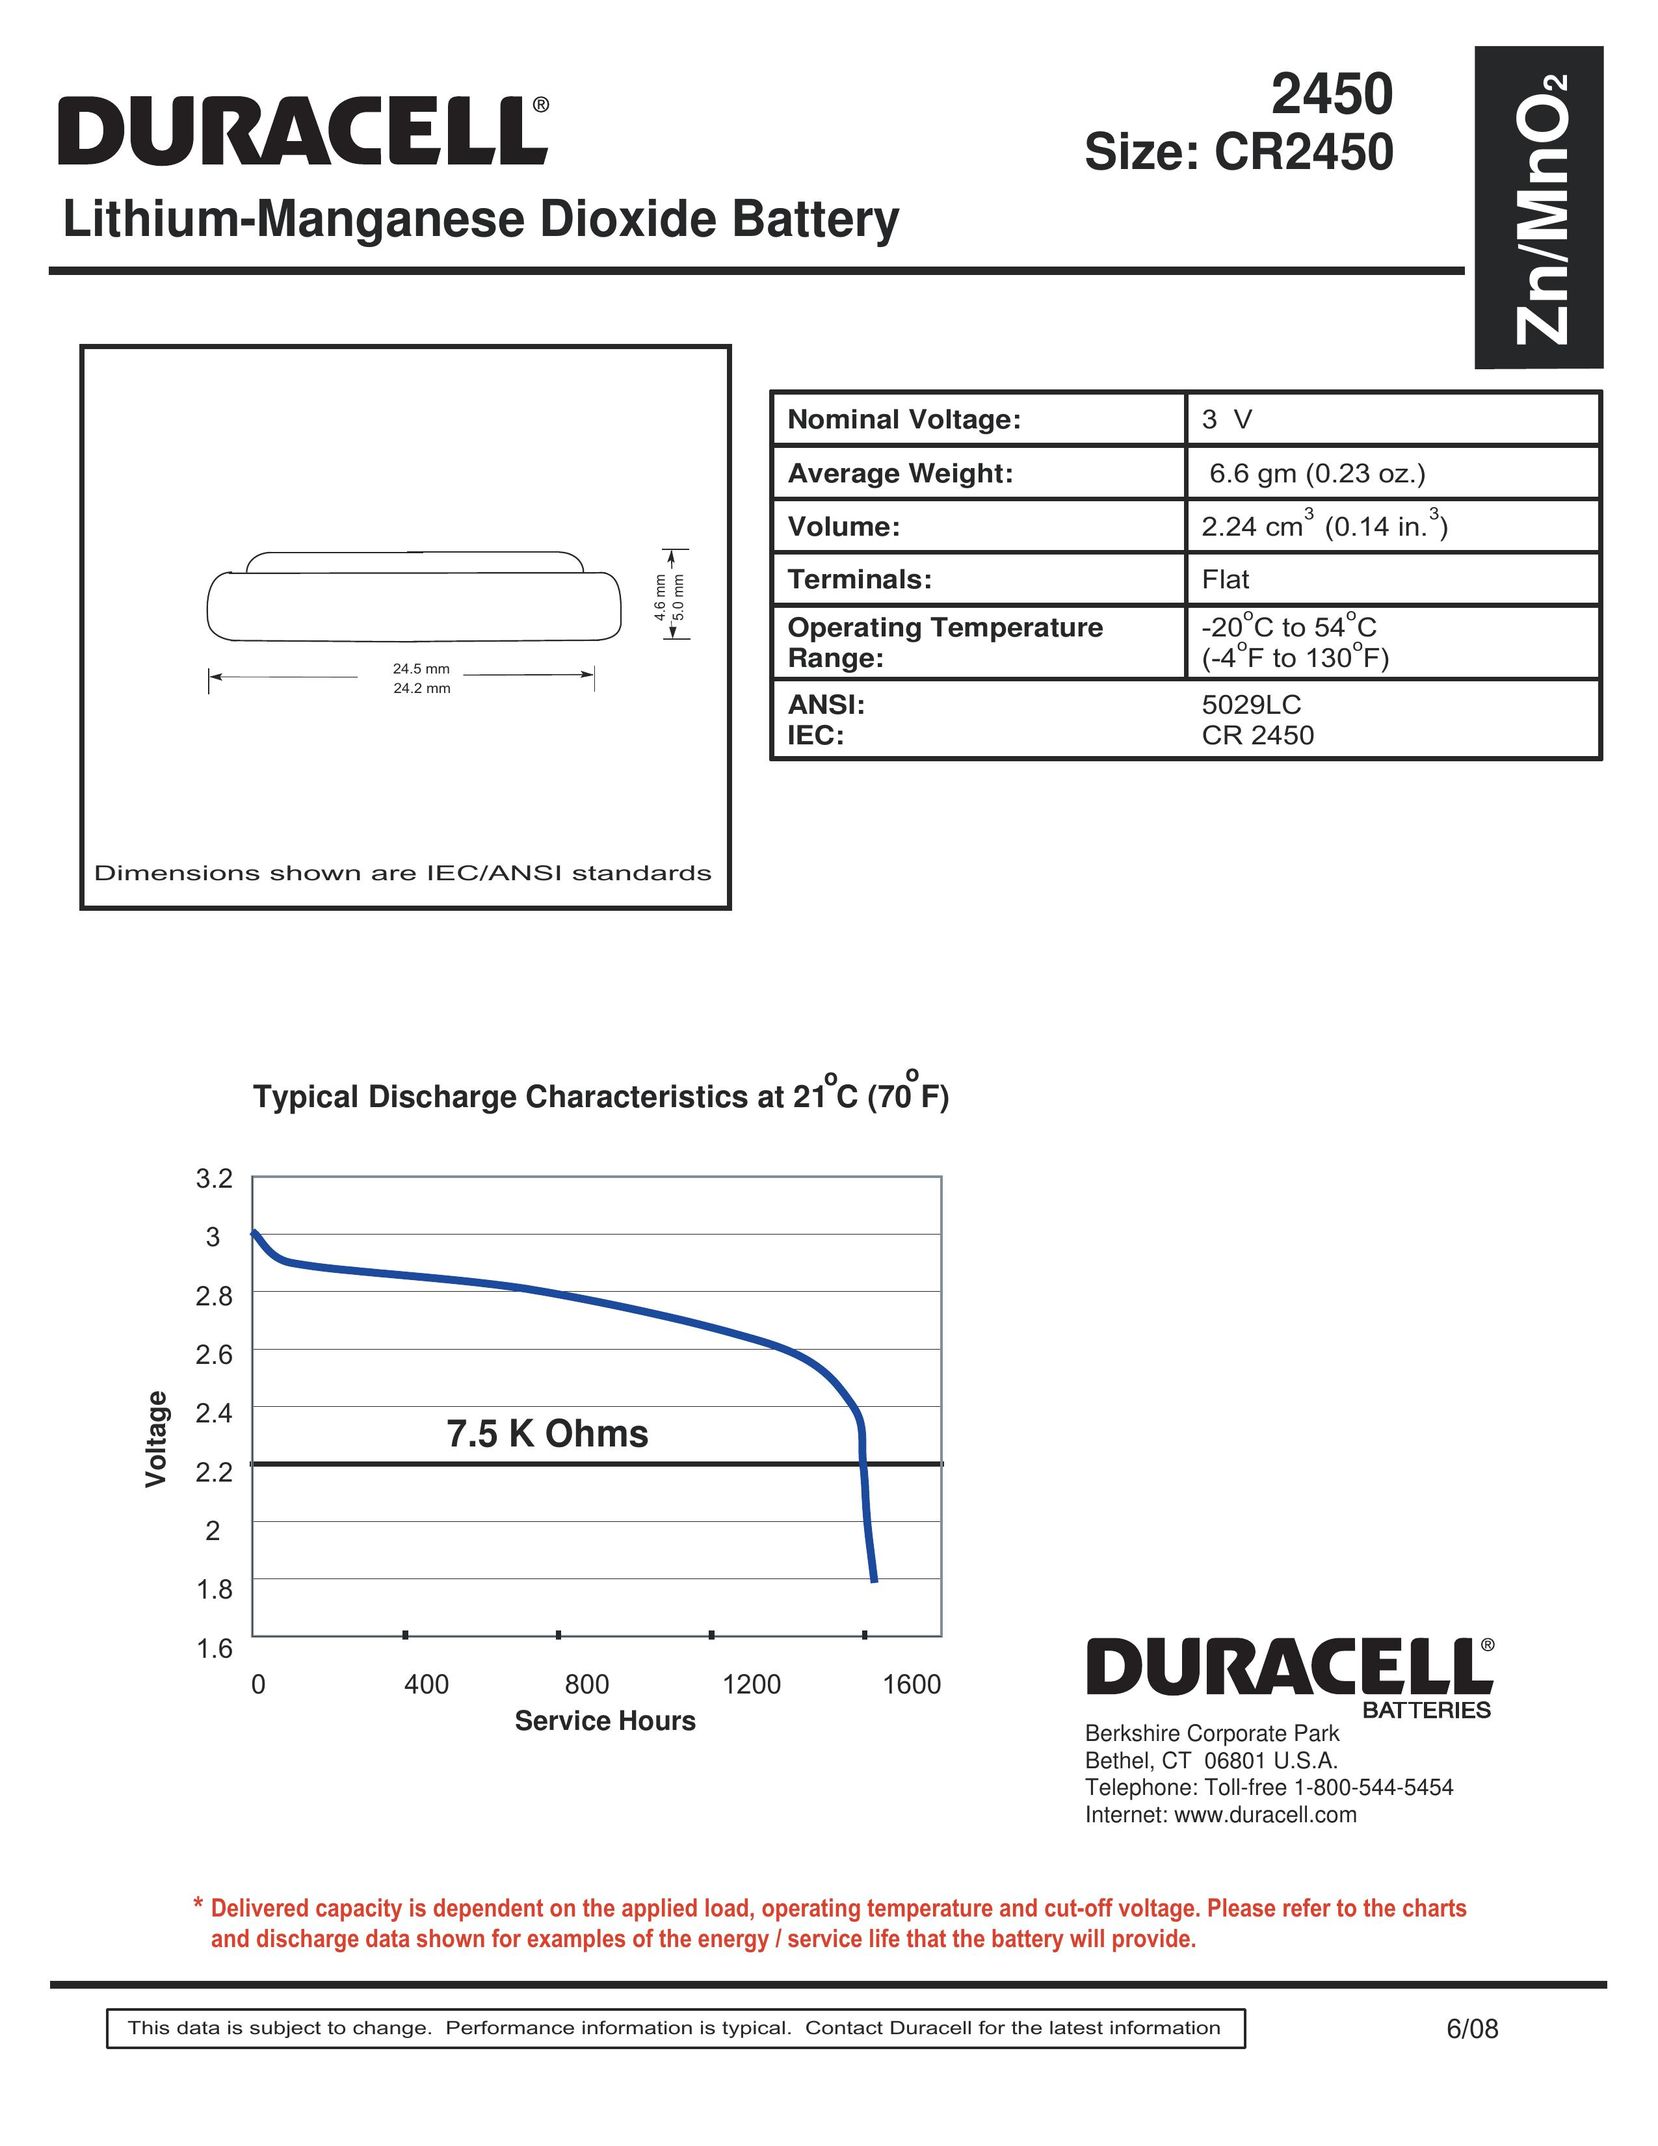 Duracell CR2450 Power Supply User Manual